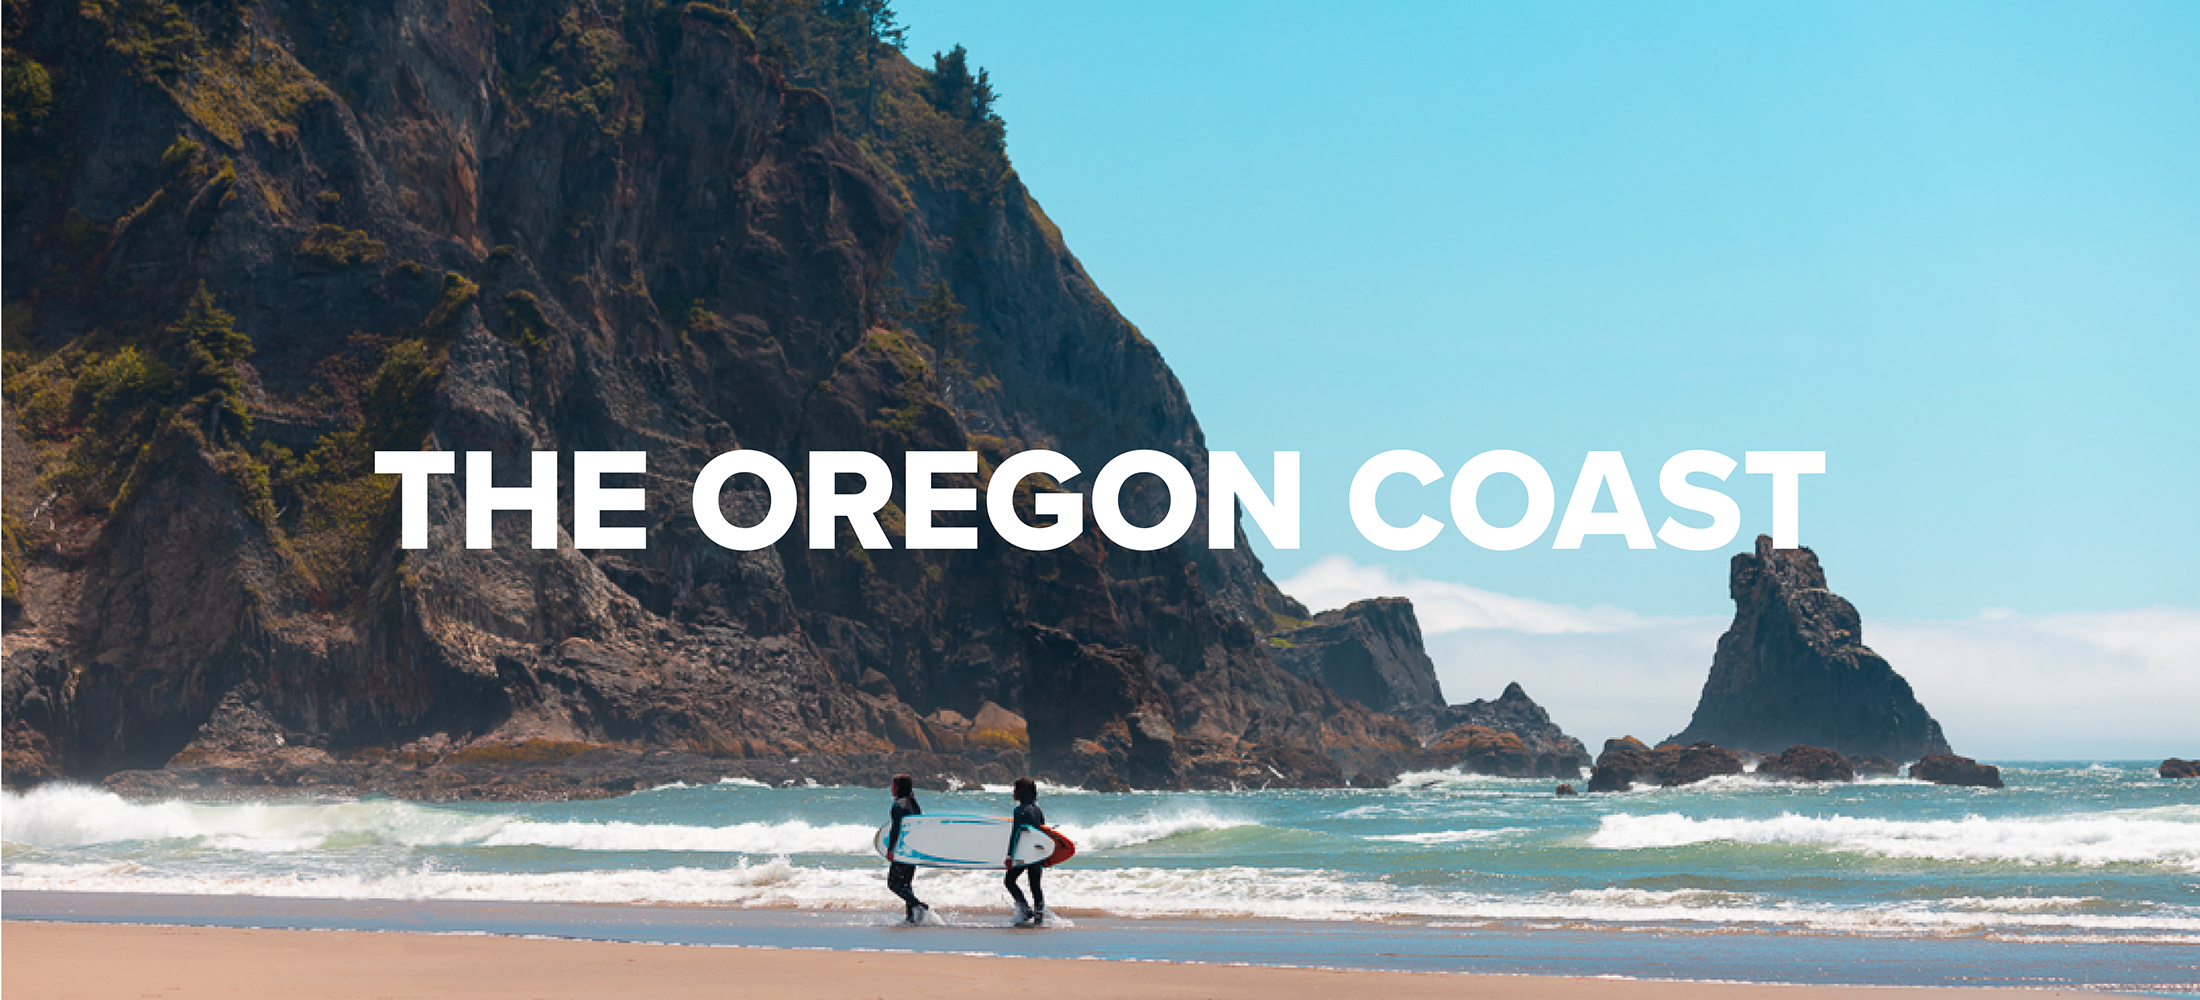 The Oregon Coast with two surfers carrying surfboards together. 